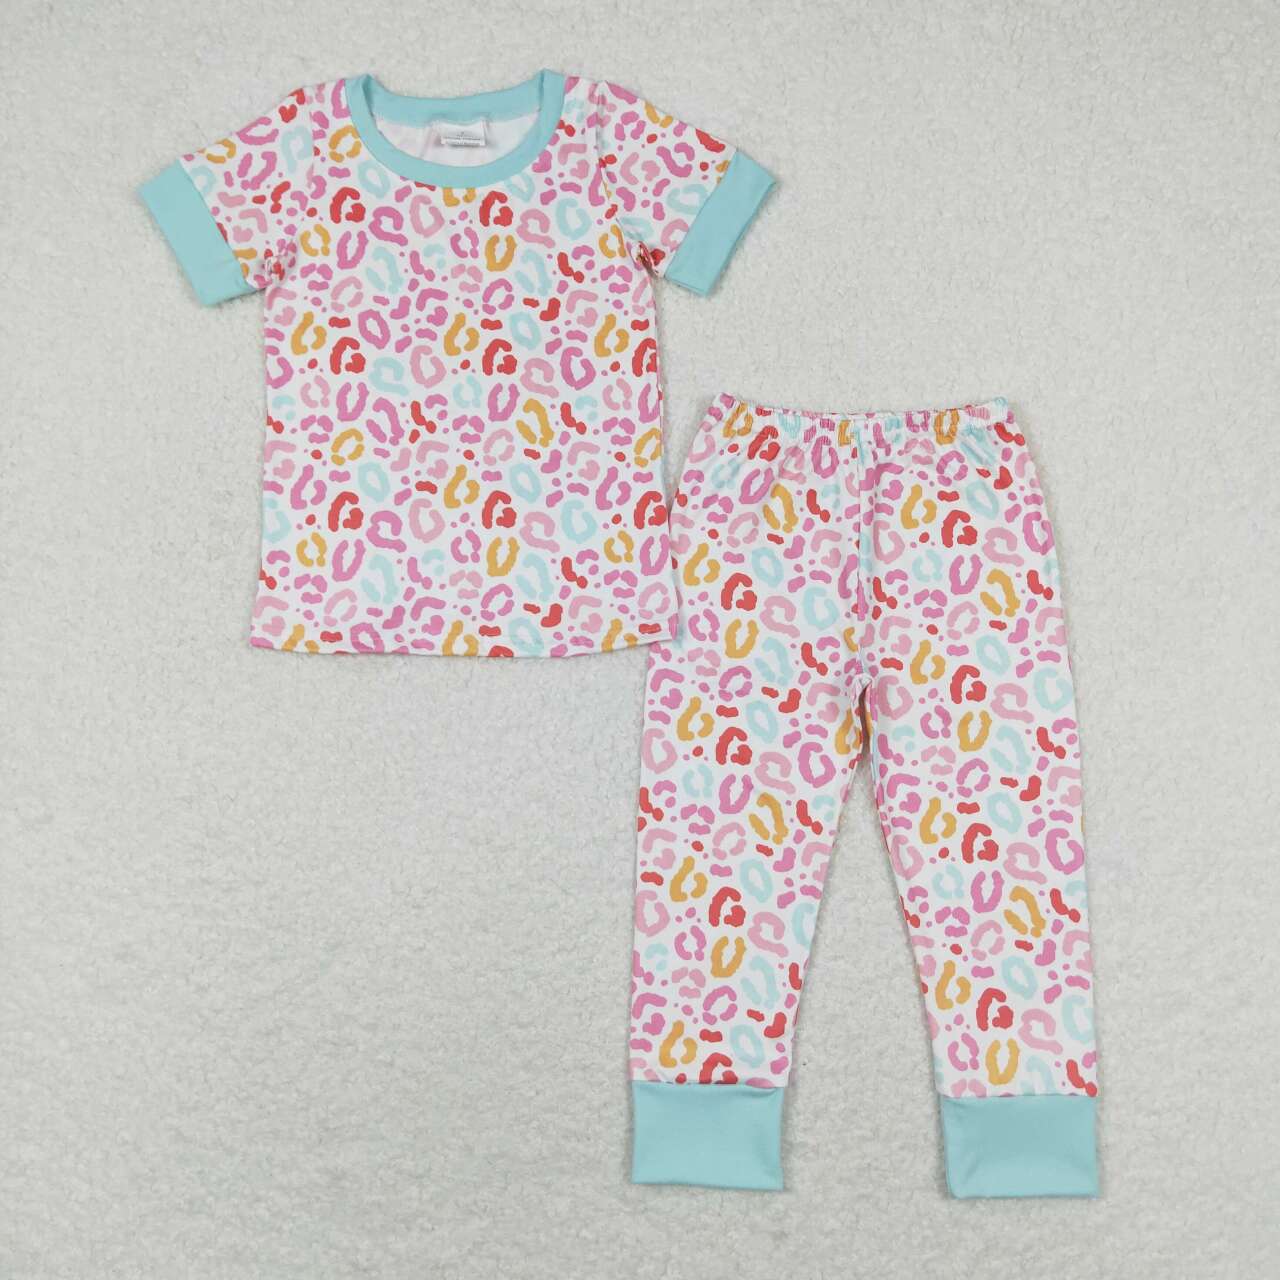 GSPO1386 Colorful leopard print short-sleeved trousers pajama set